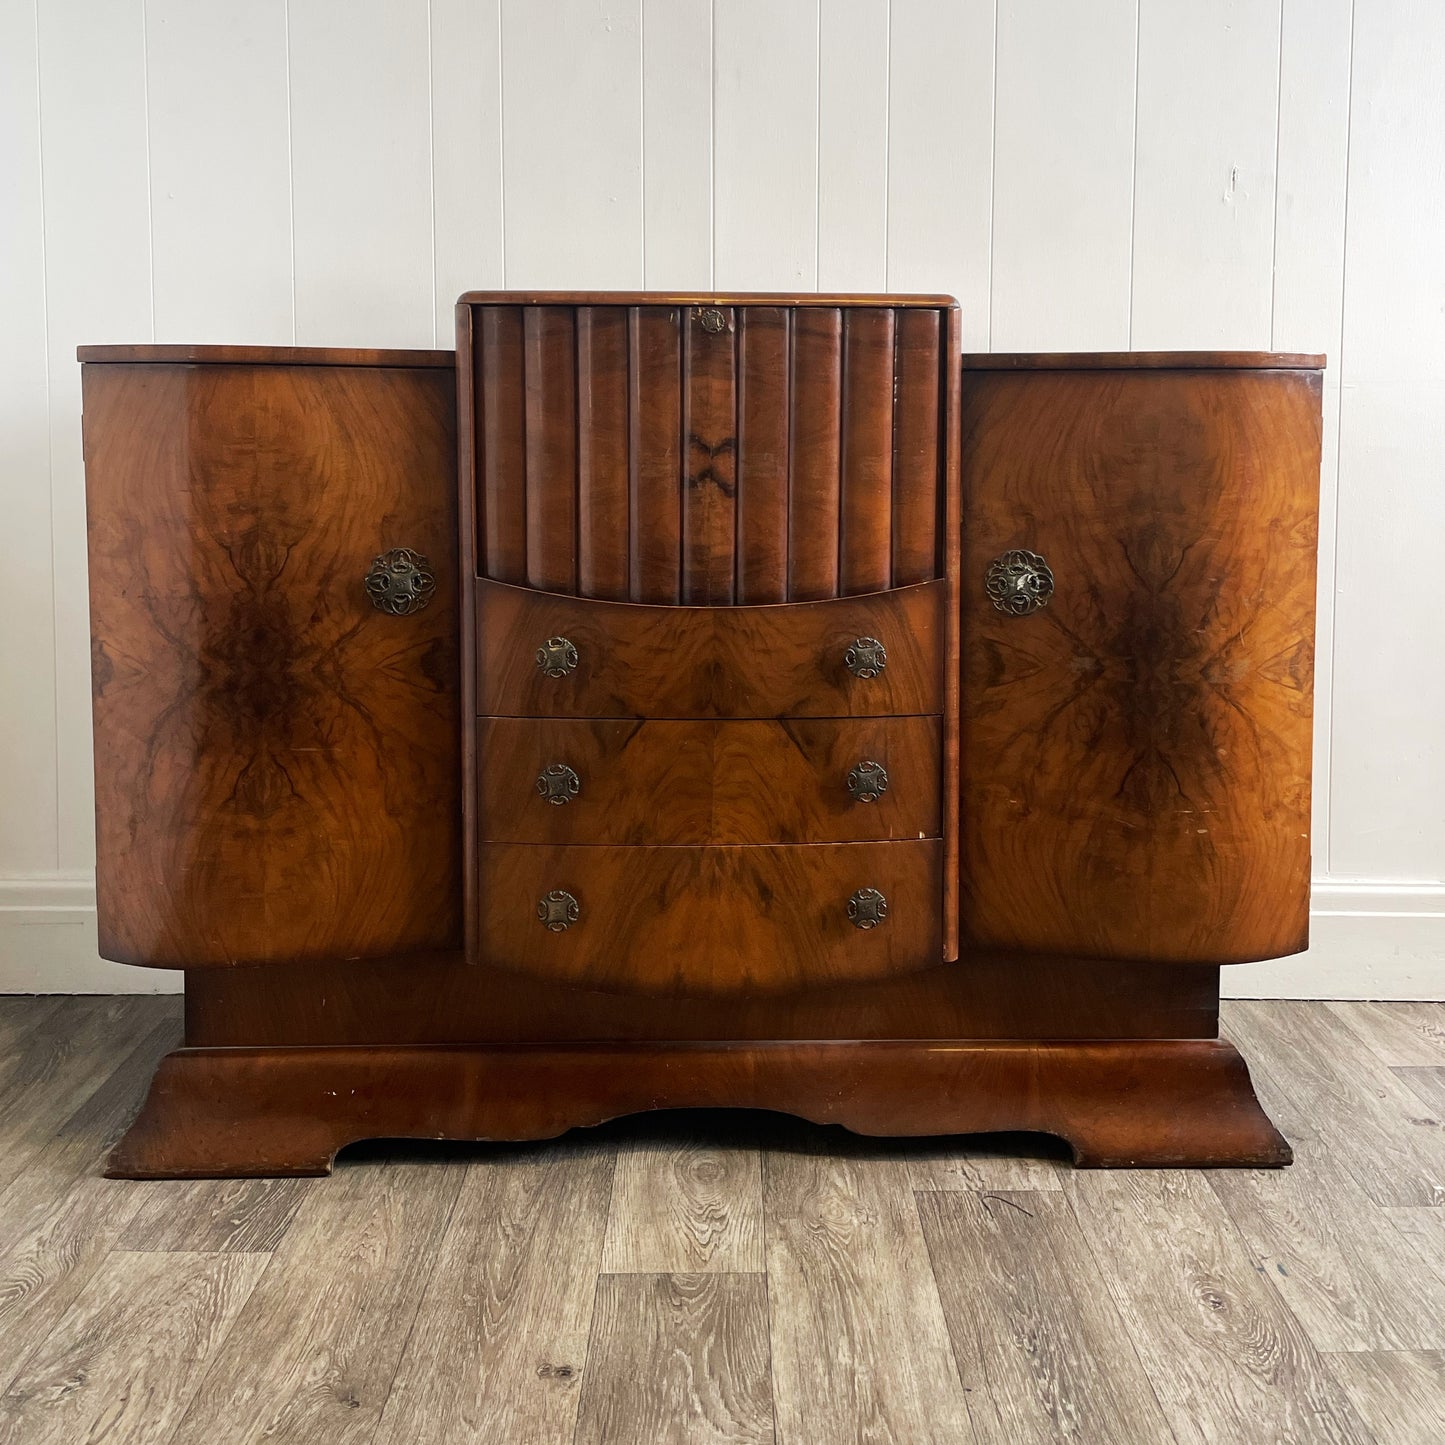 Large Art Deco Cocktail Cabinet Available for Commission